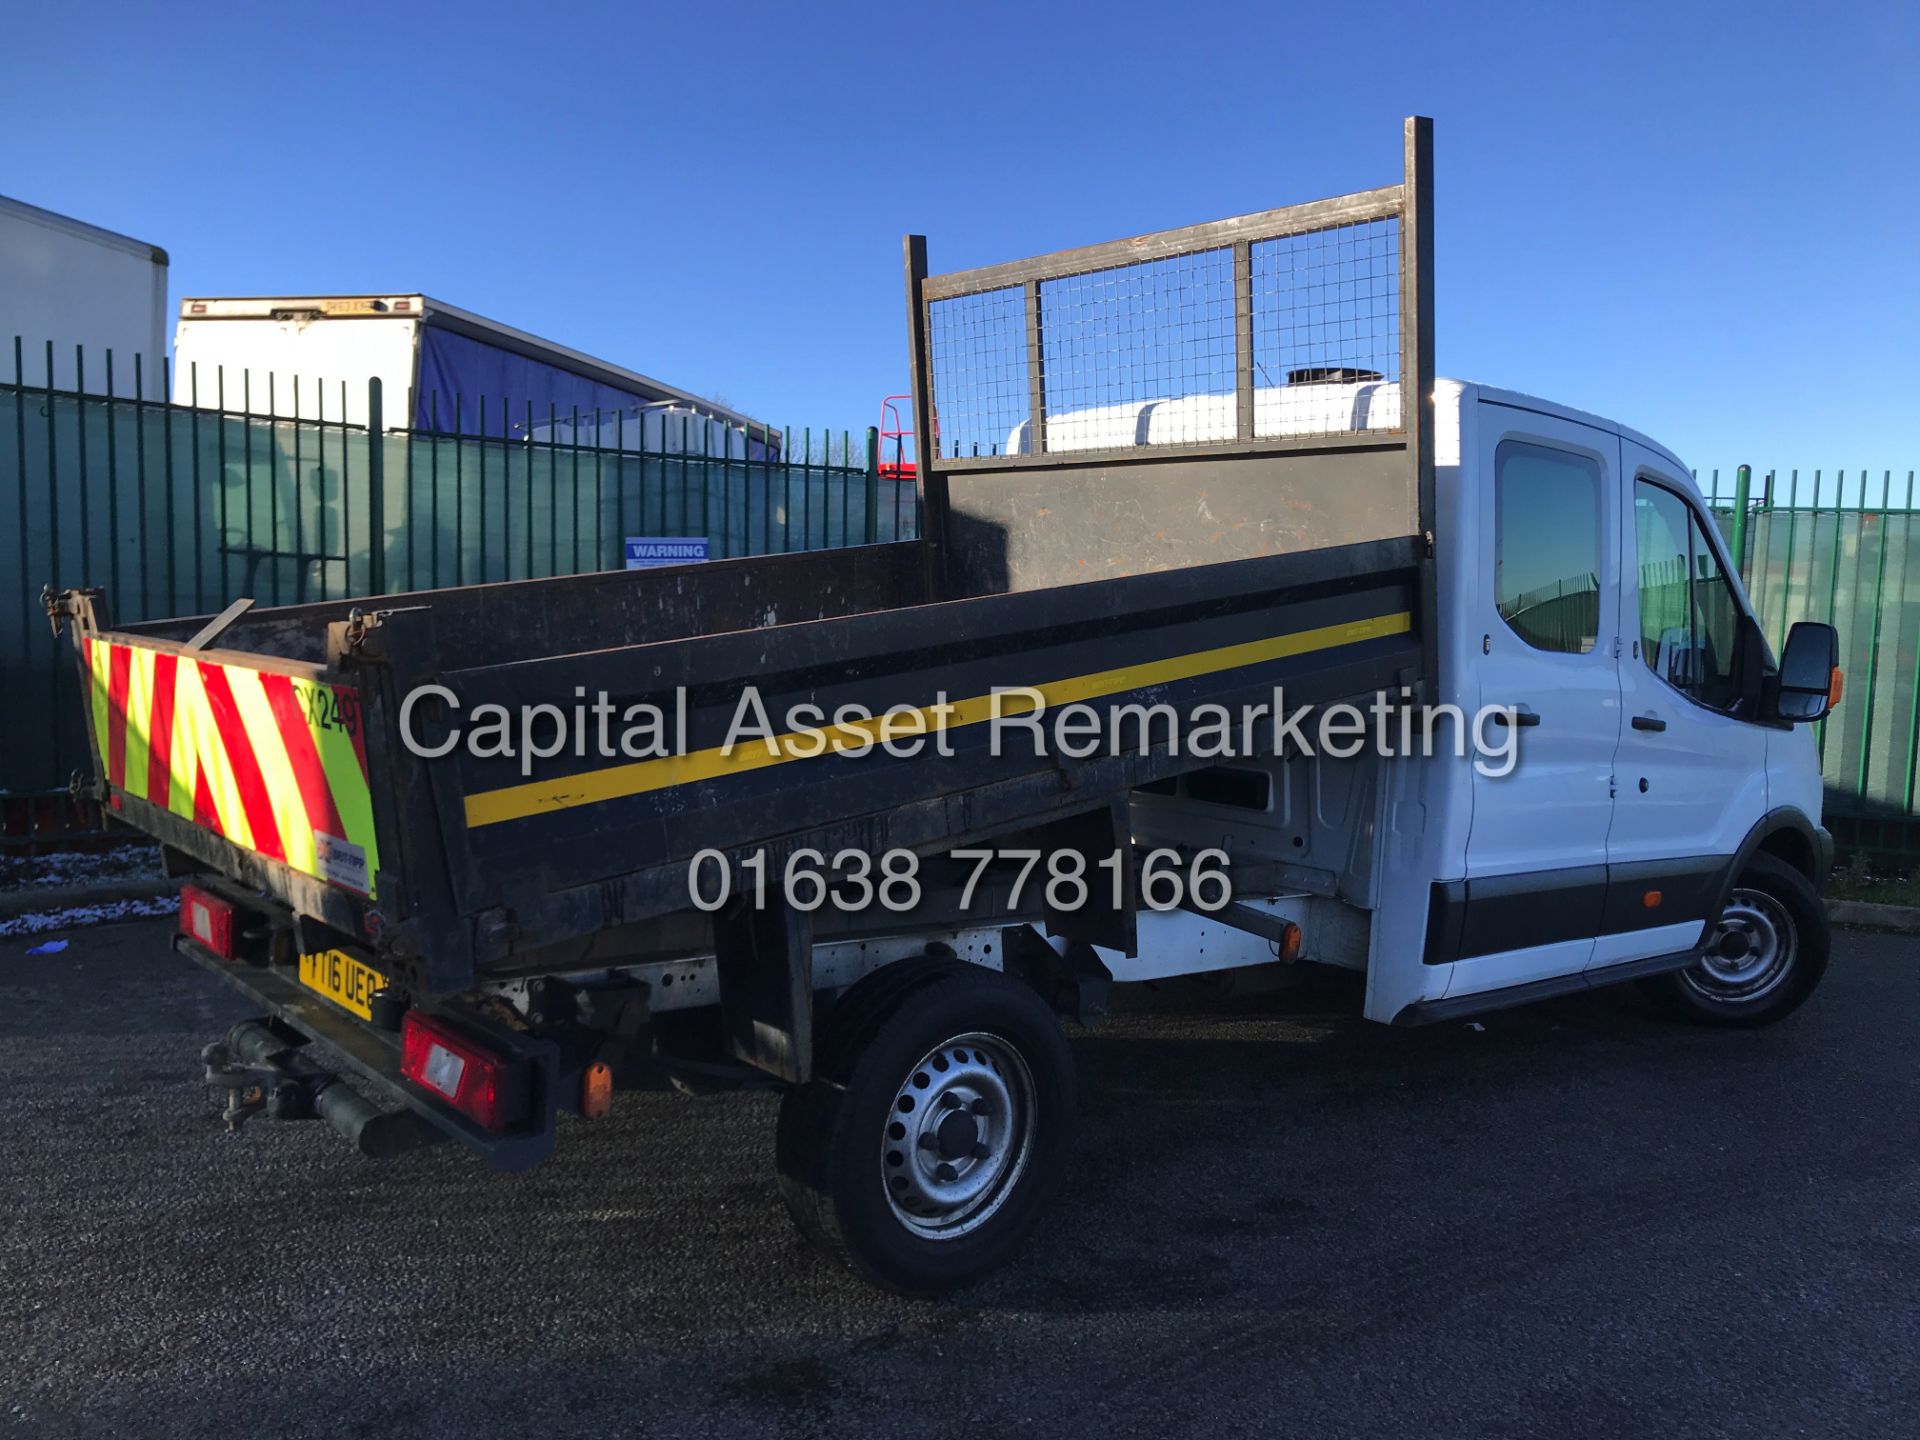 (ON SALE) FORD TRASNIT 2.2TDCI "125BHP - 6 SPEED" T350 D/C "TIPPER" (16 REG) 1 OWNER - LOW MILEAGE - Image 7 of 13